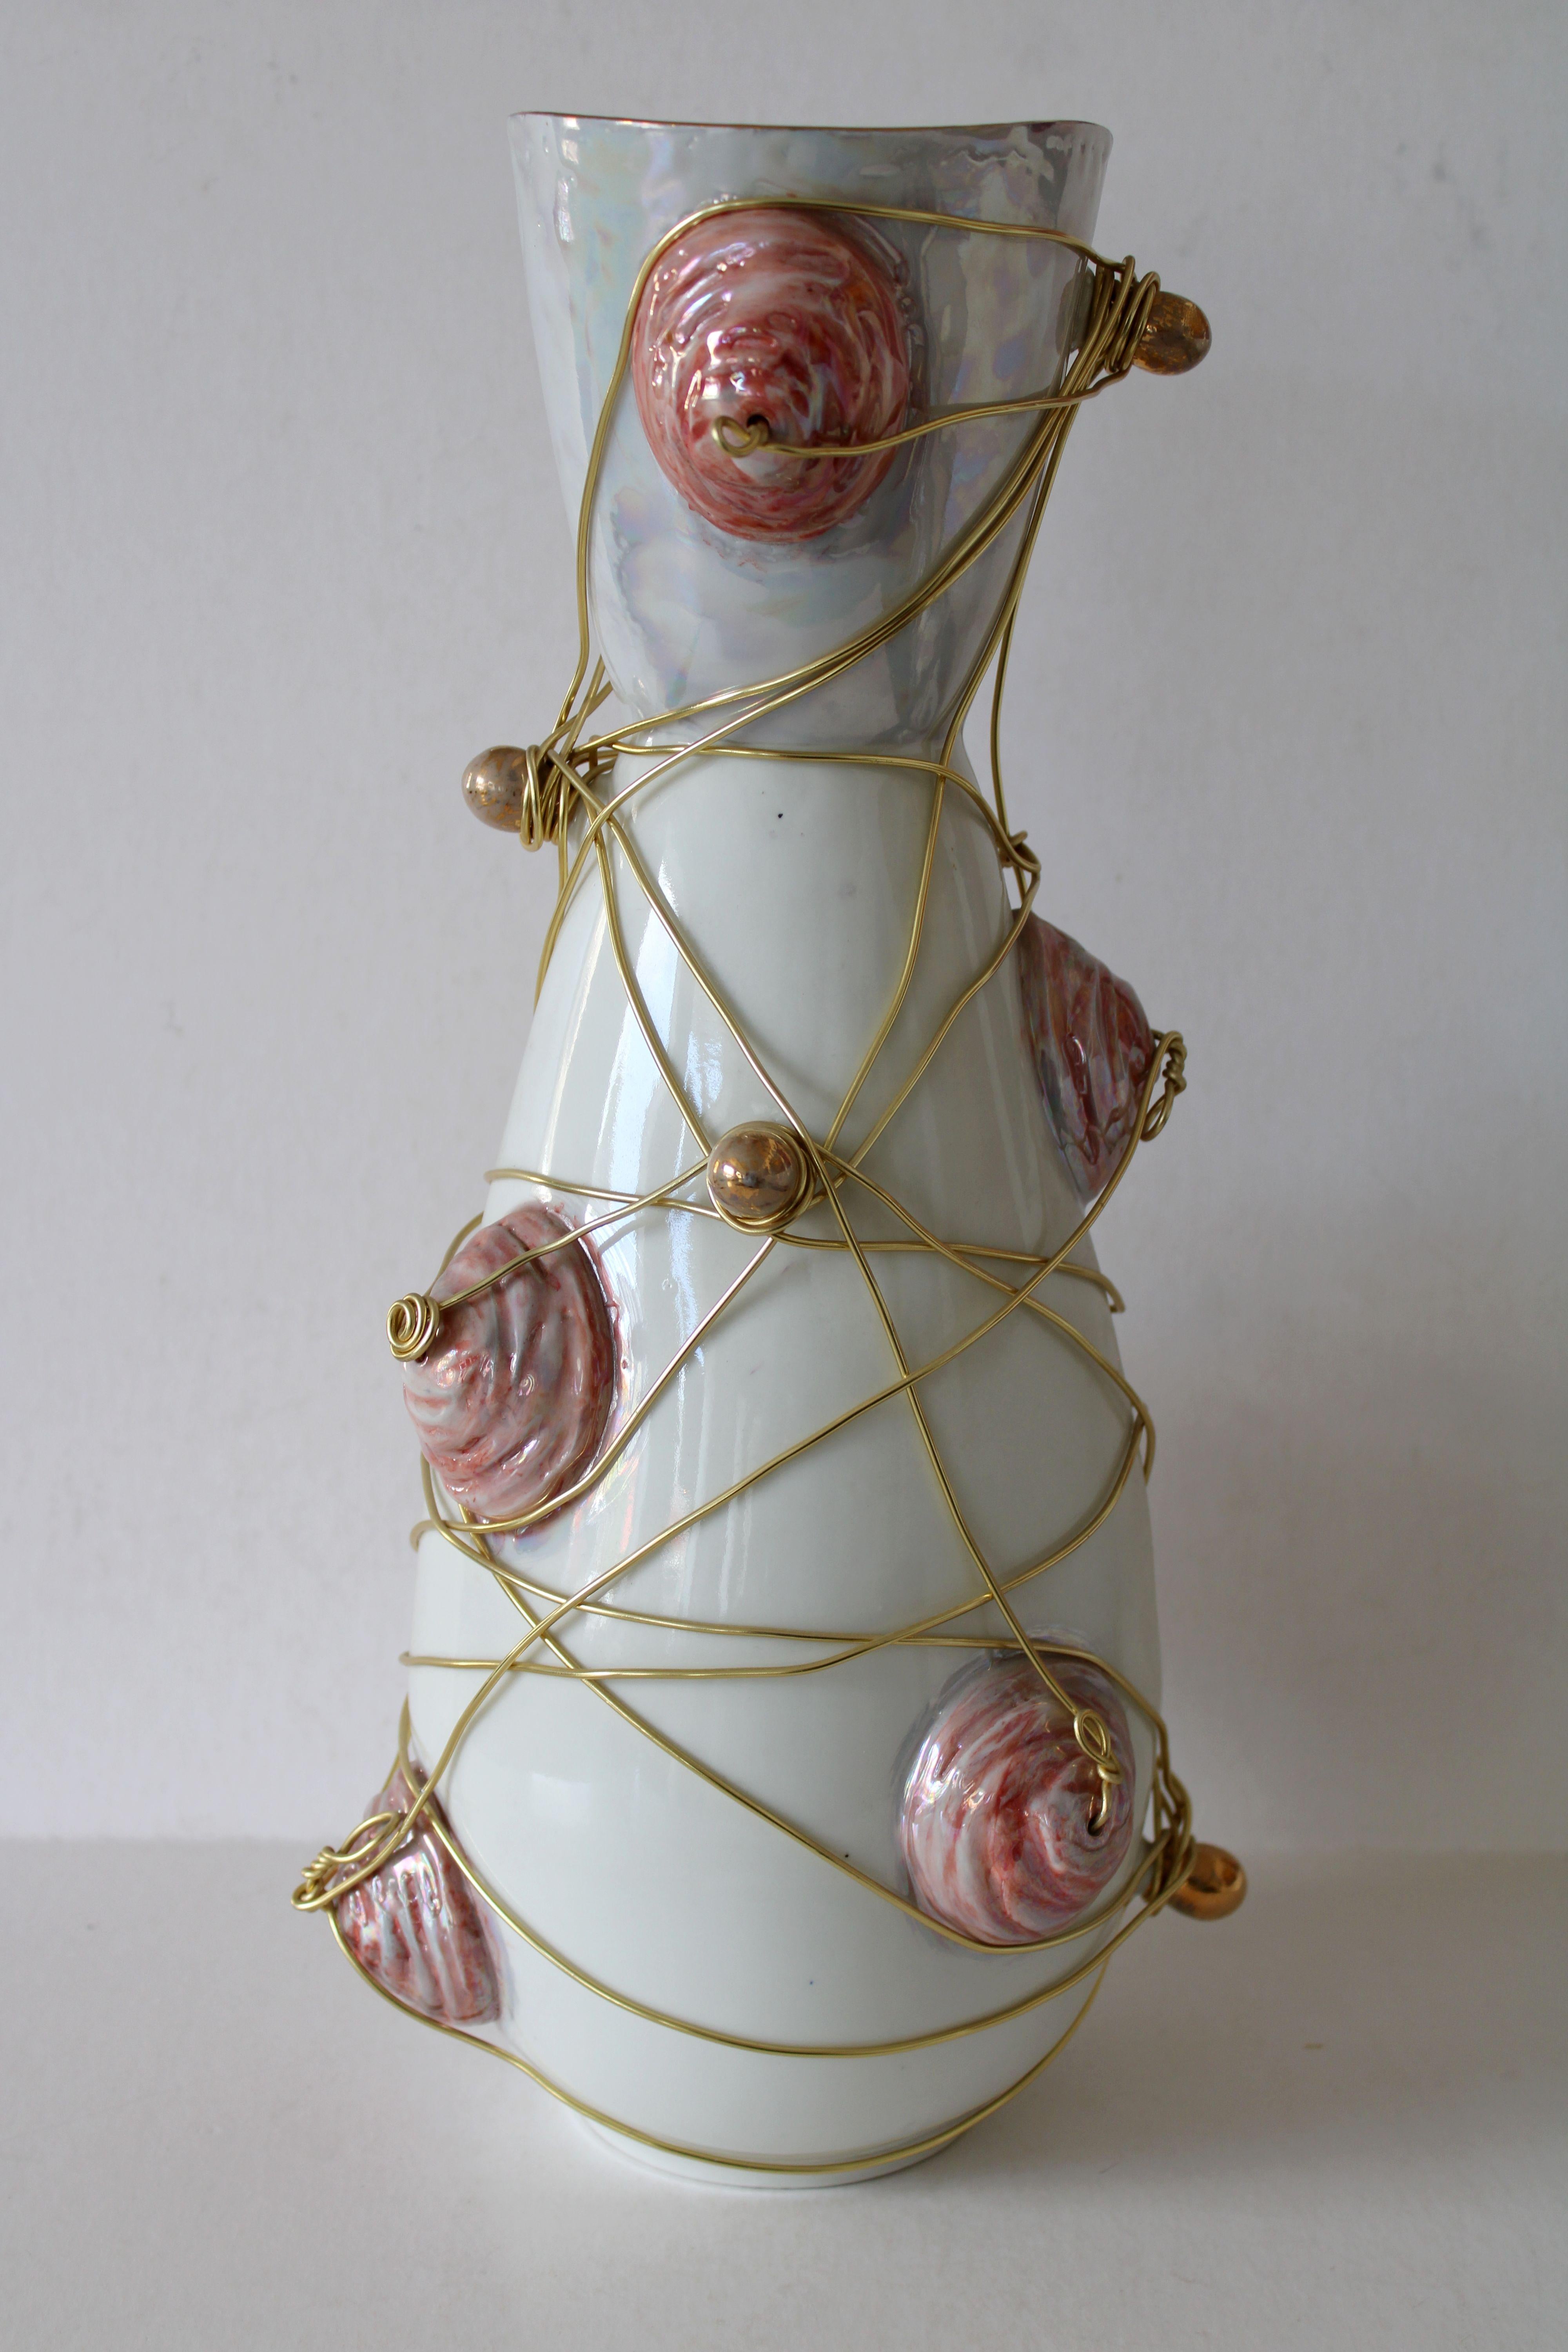 Vases with wires - set of two  2009, porcelain, wire, h 19.5 cm, h 43 cm For Sale 10